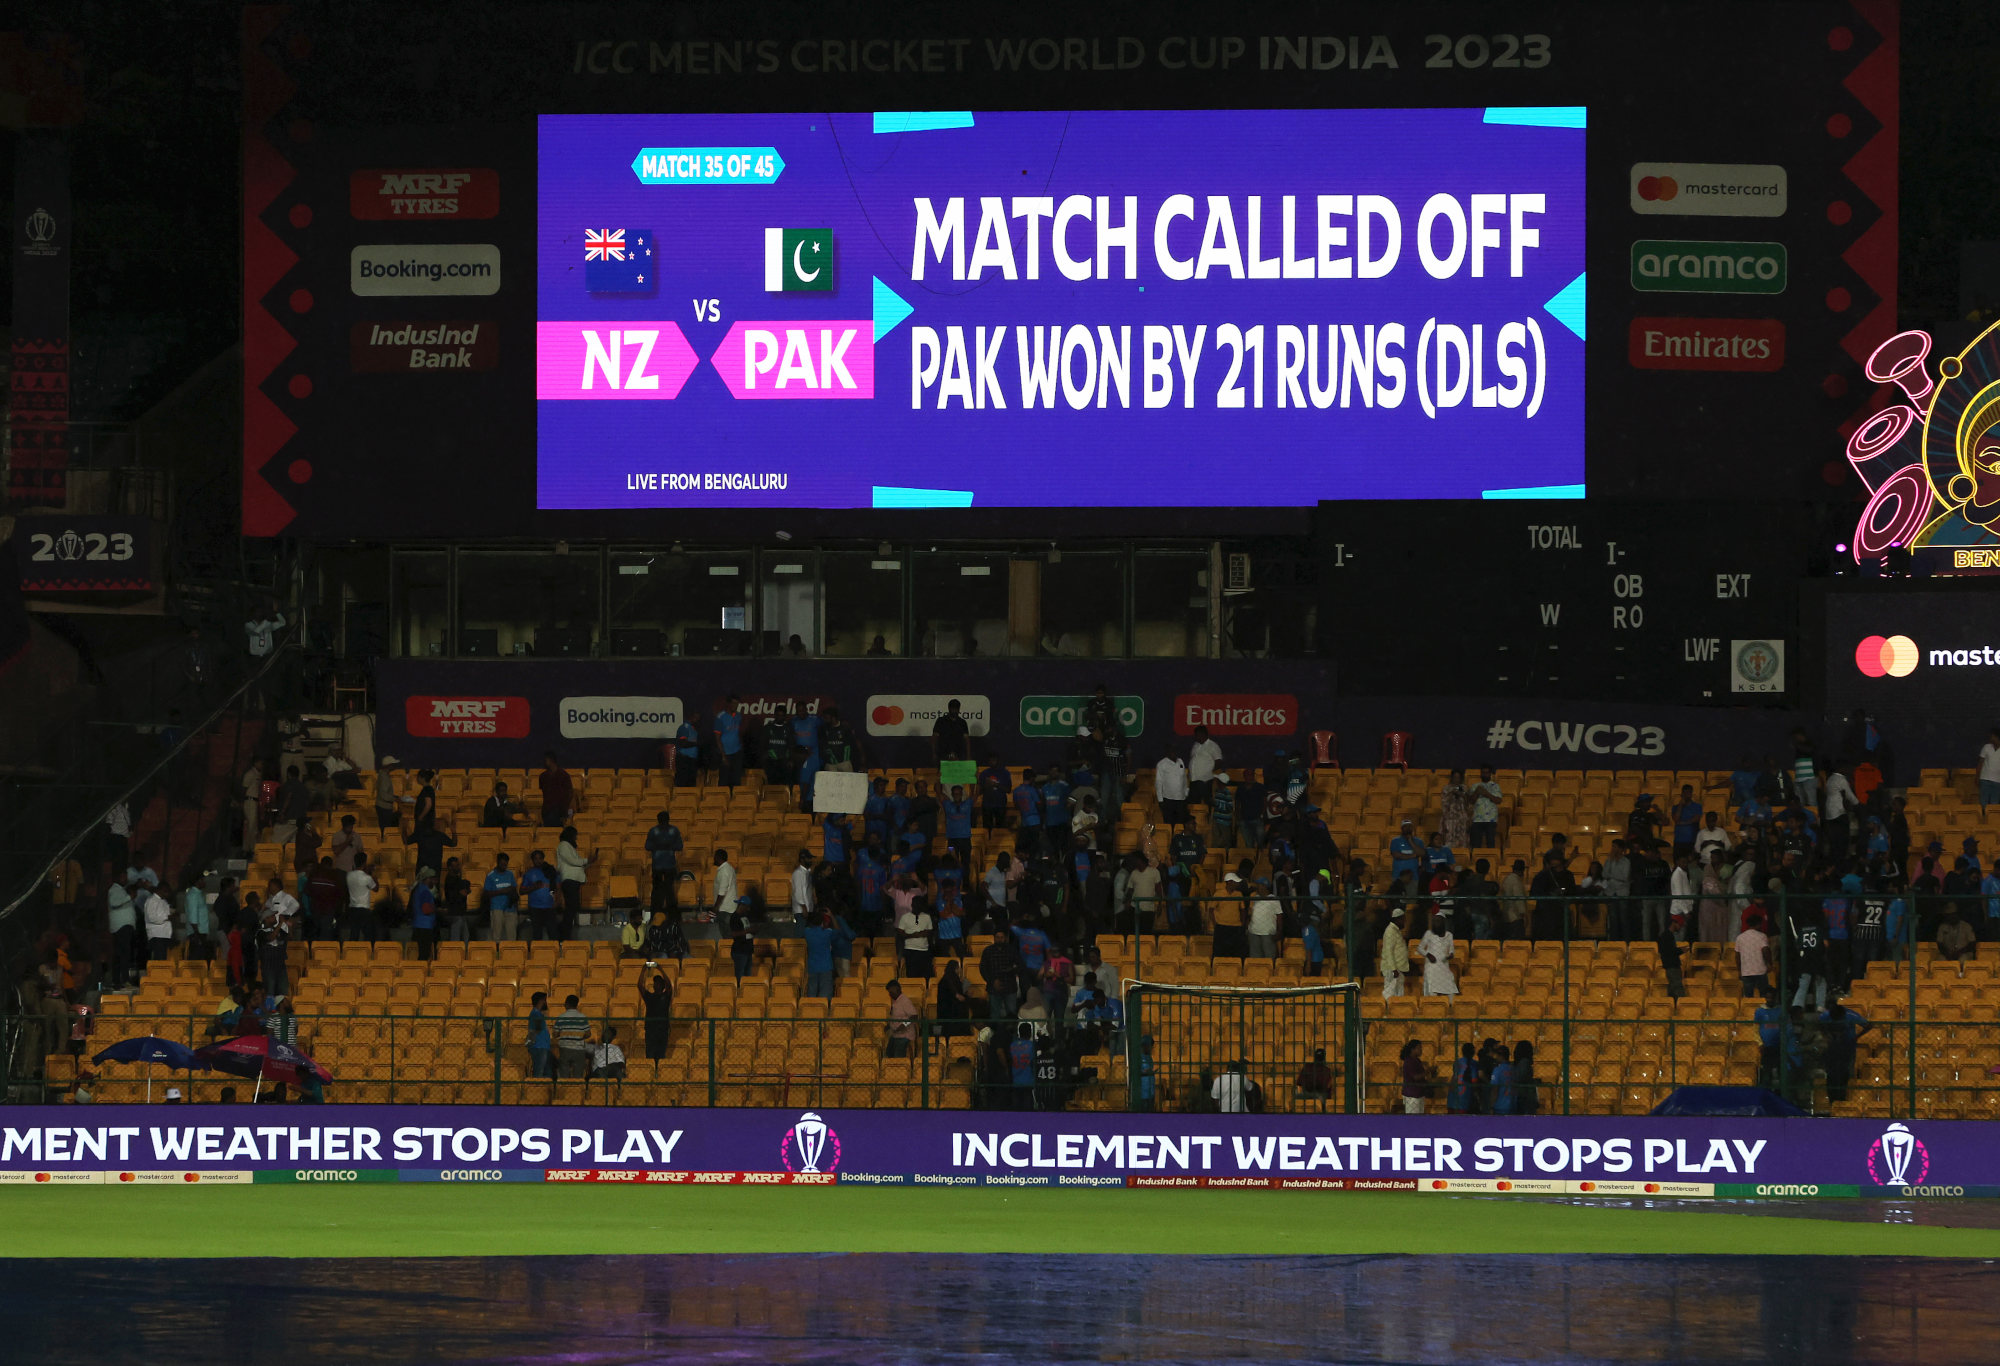 The Bengaluru scoreboard proclaims Pakistan's victory over New Zealand via the Duckworth-Lewis-Stern system.